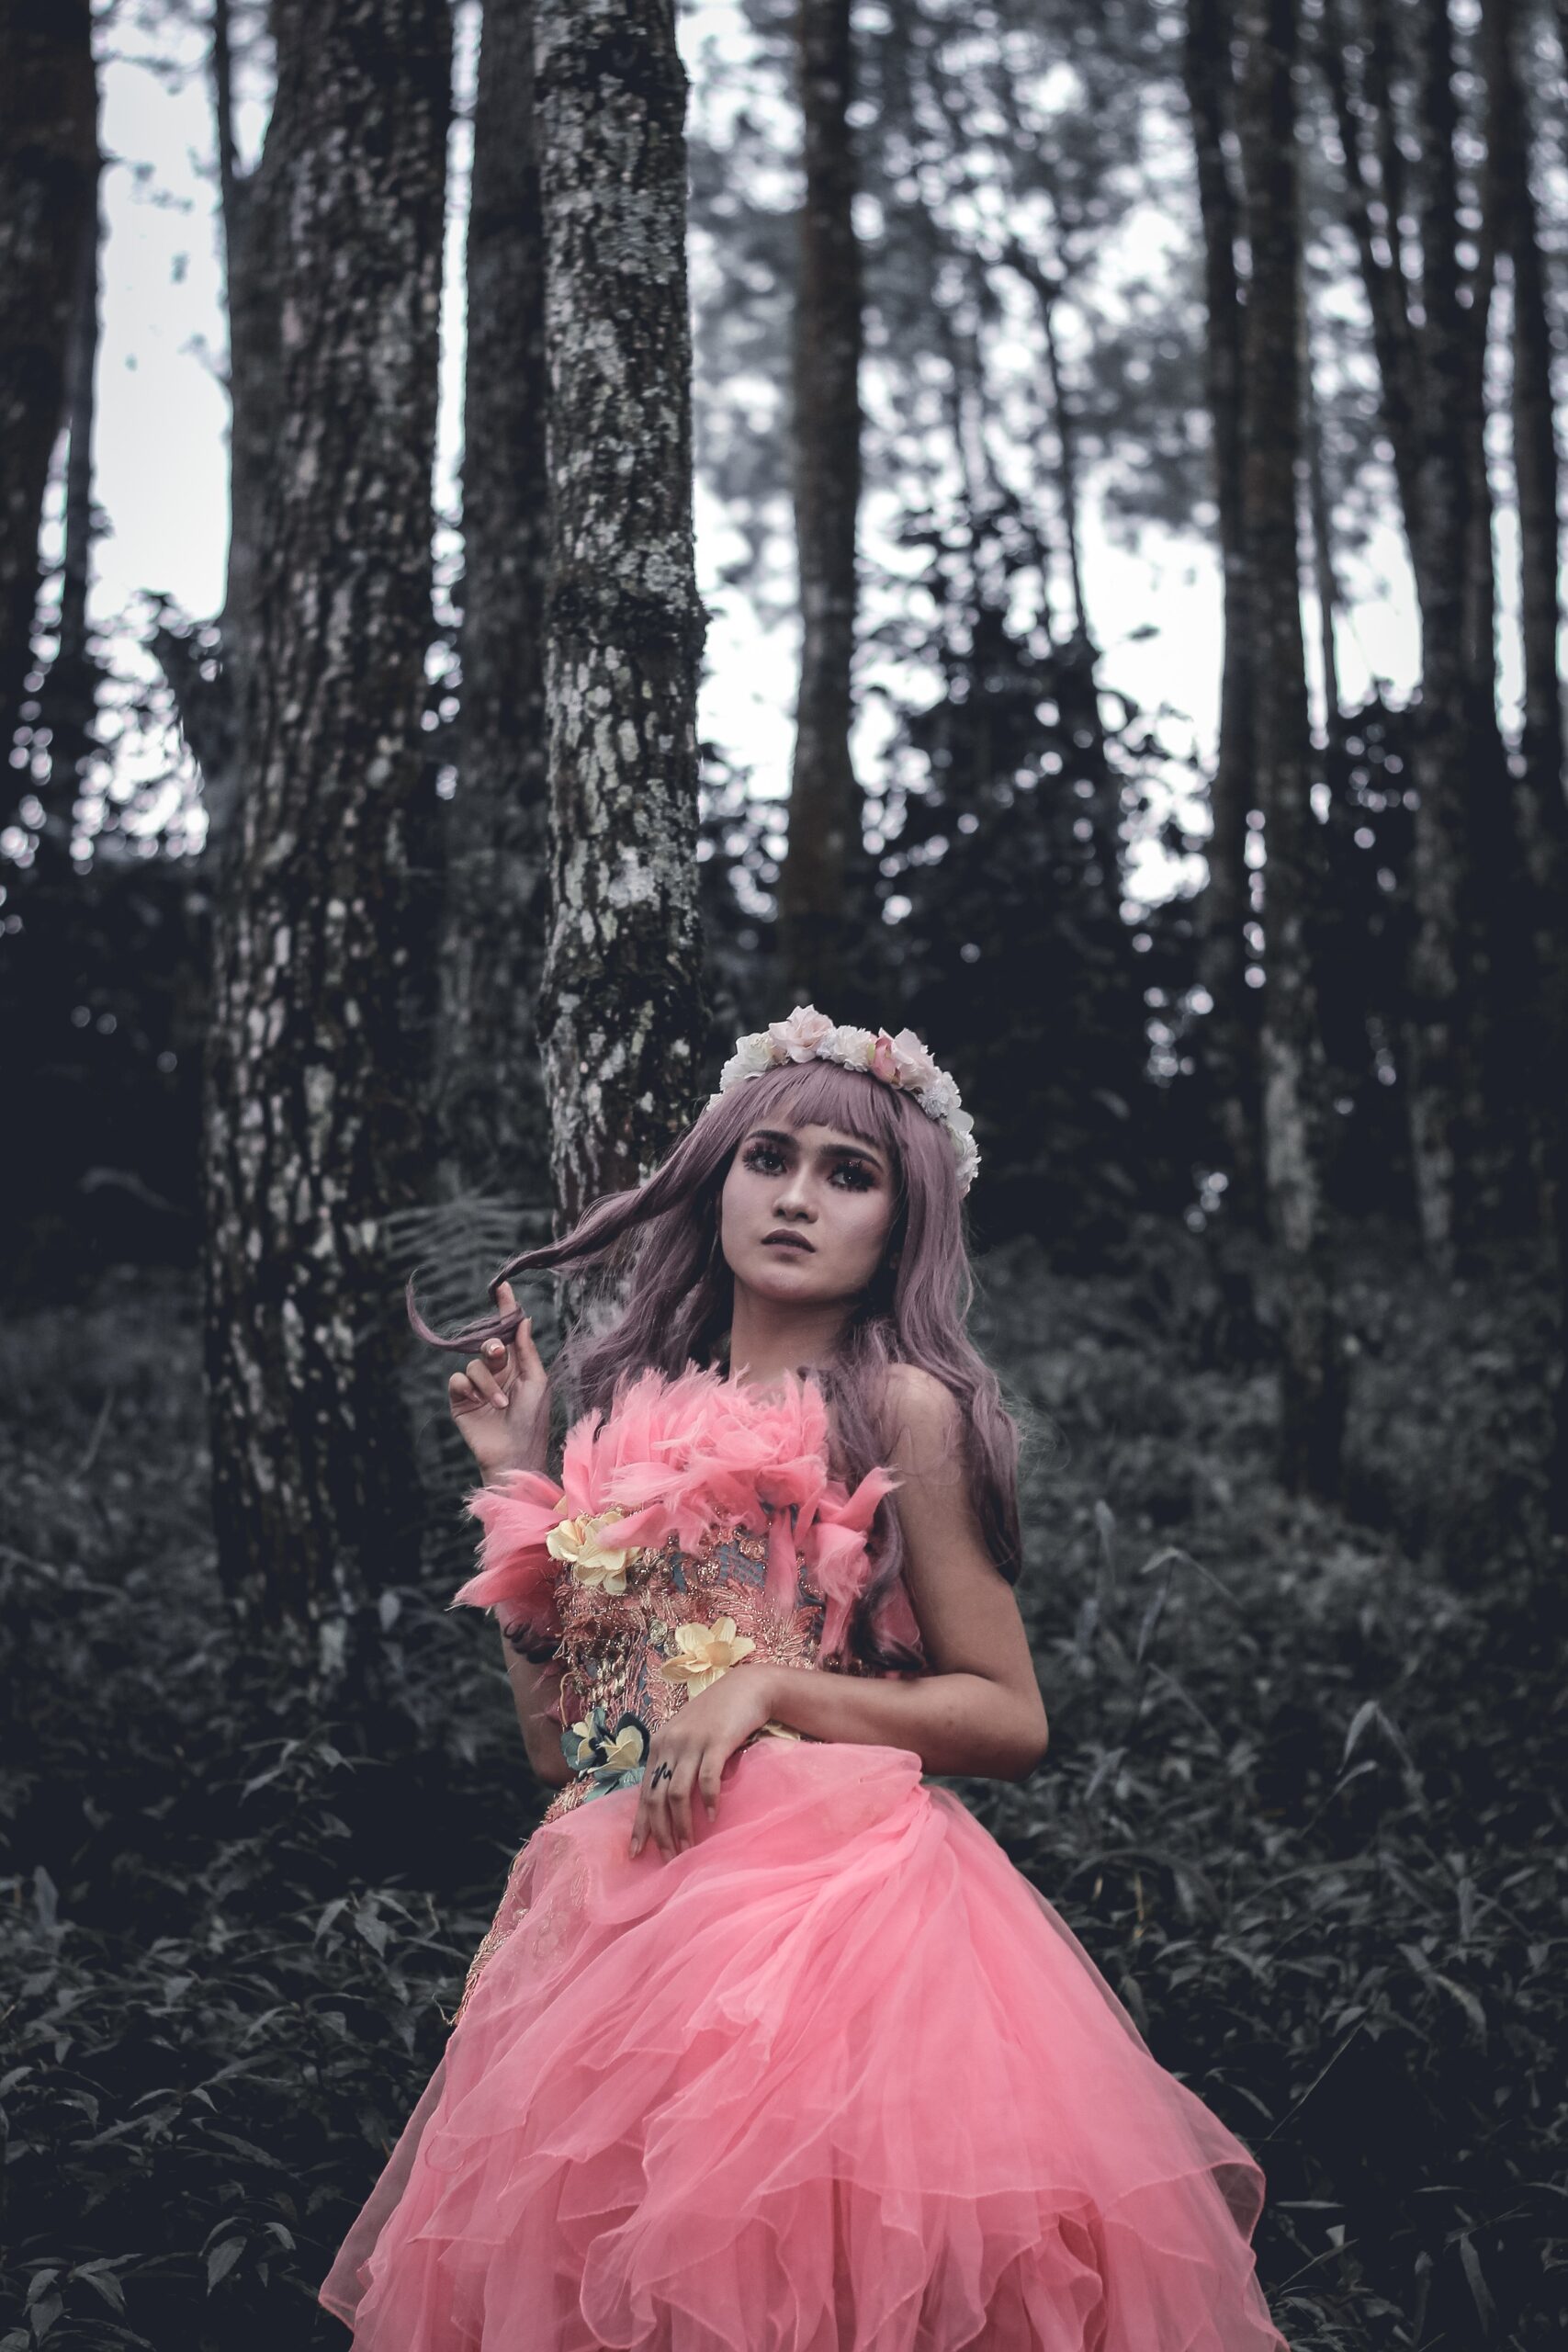 Emotionless woman in pink evening dress standing in summer forest